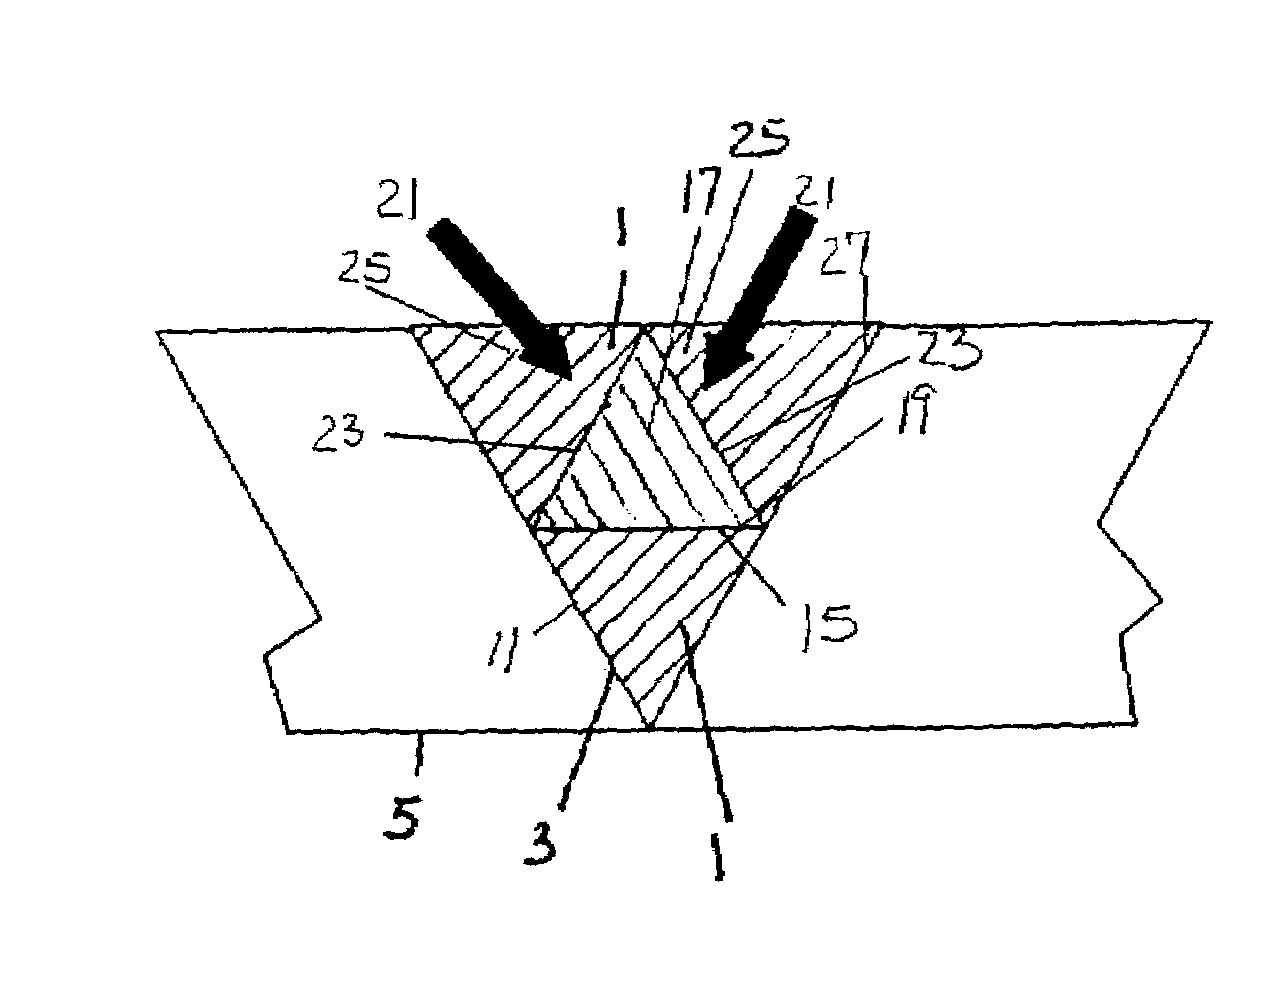 Repair with feedstock having conforming surfaces with a substrate